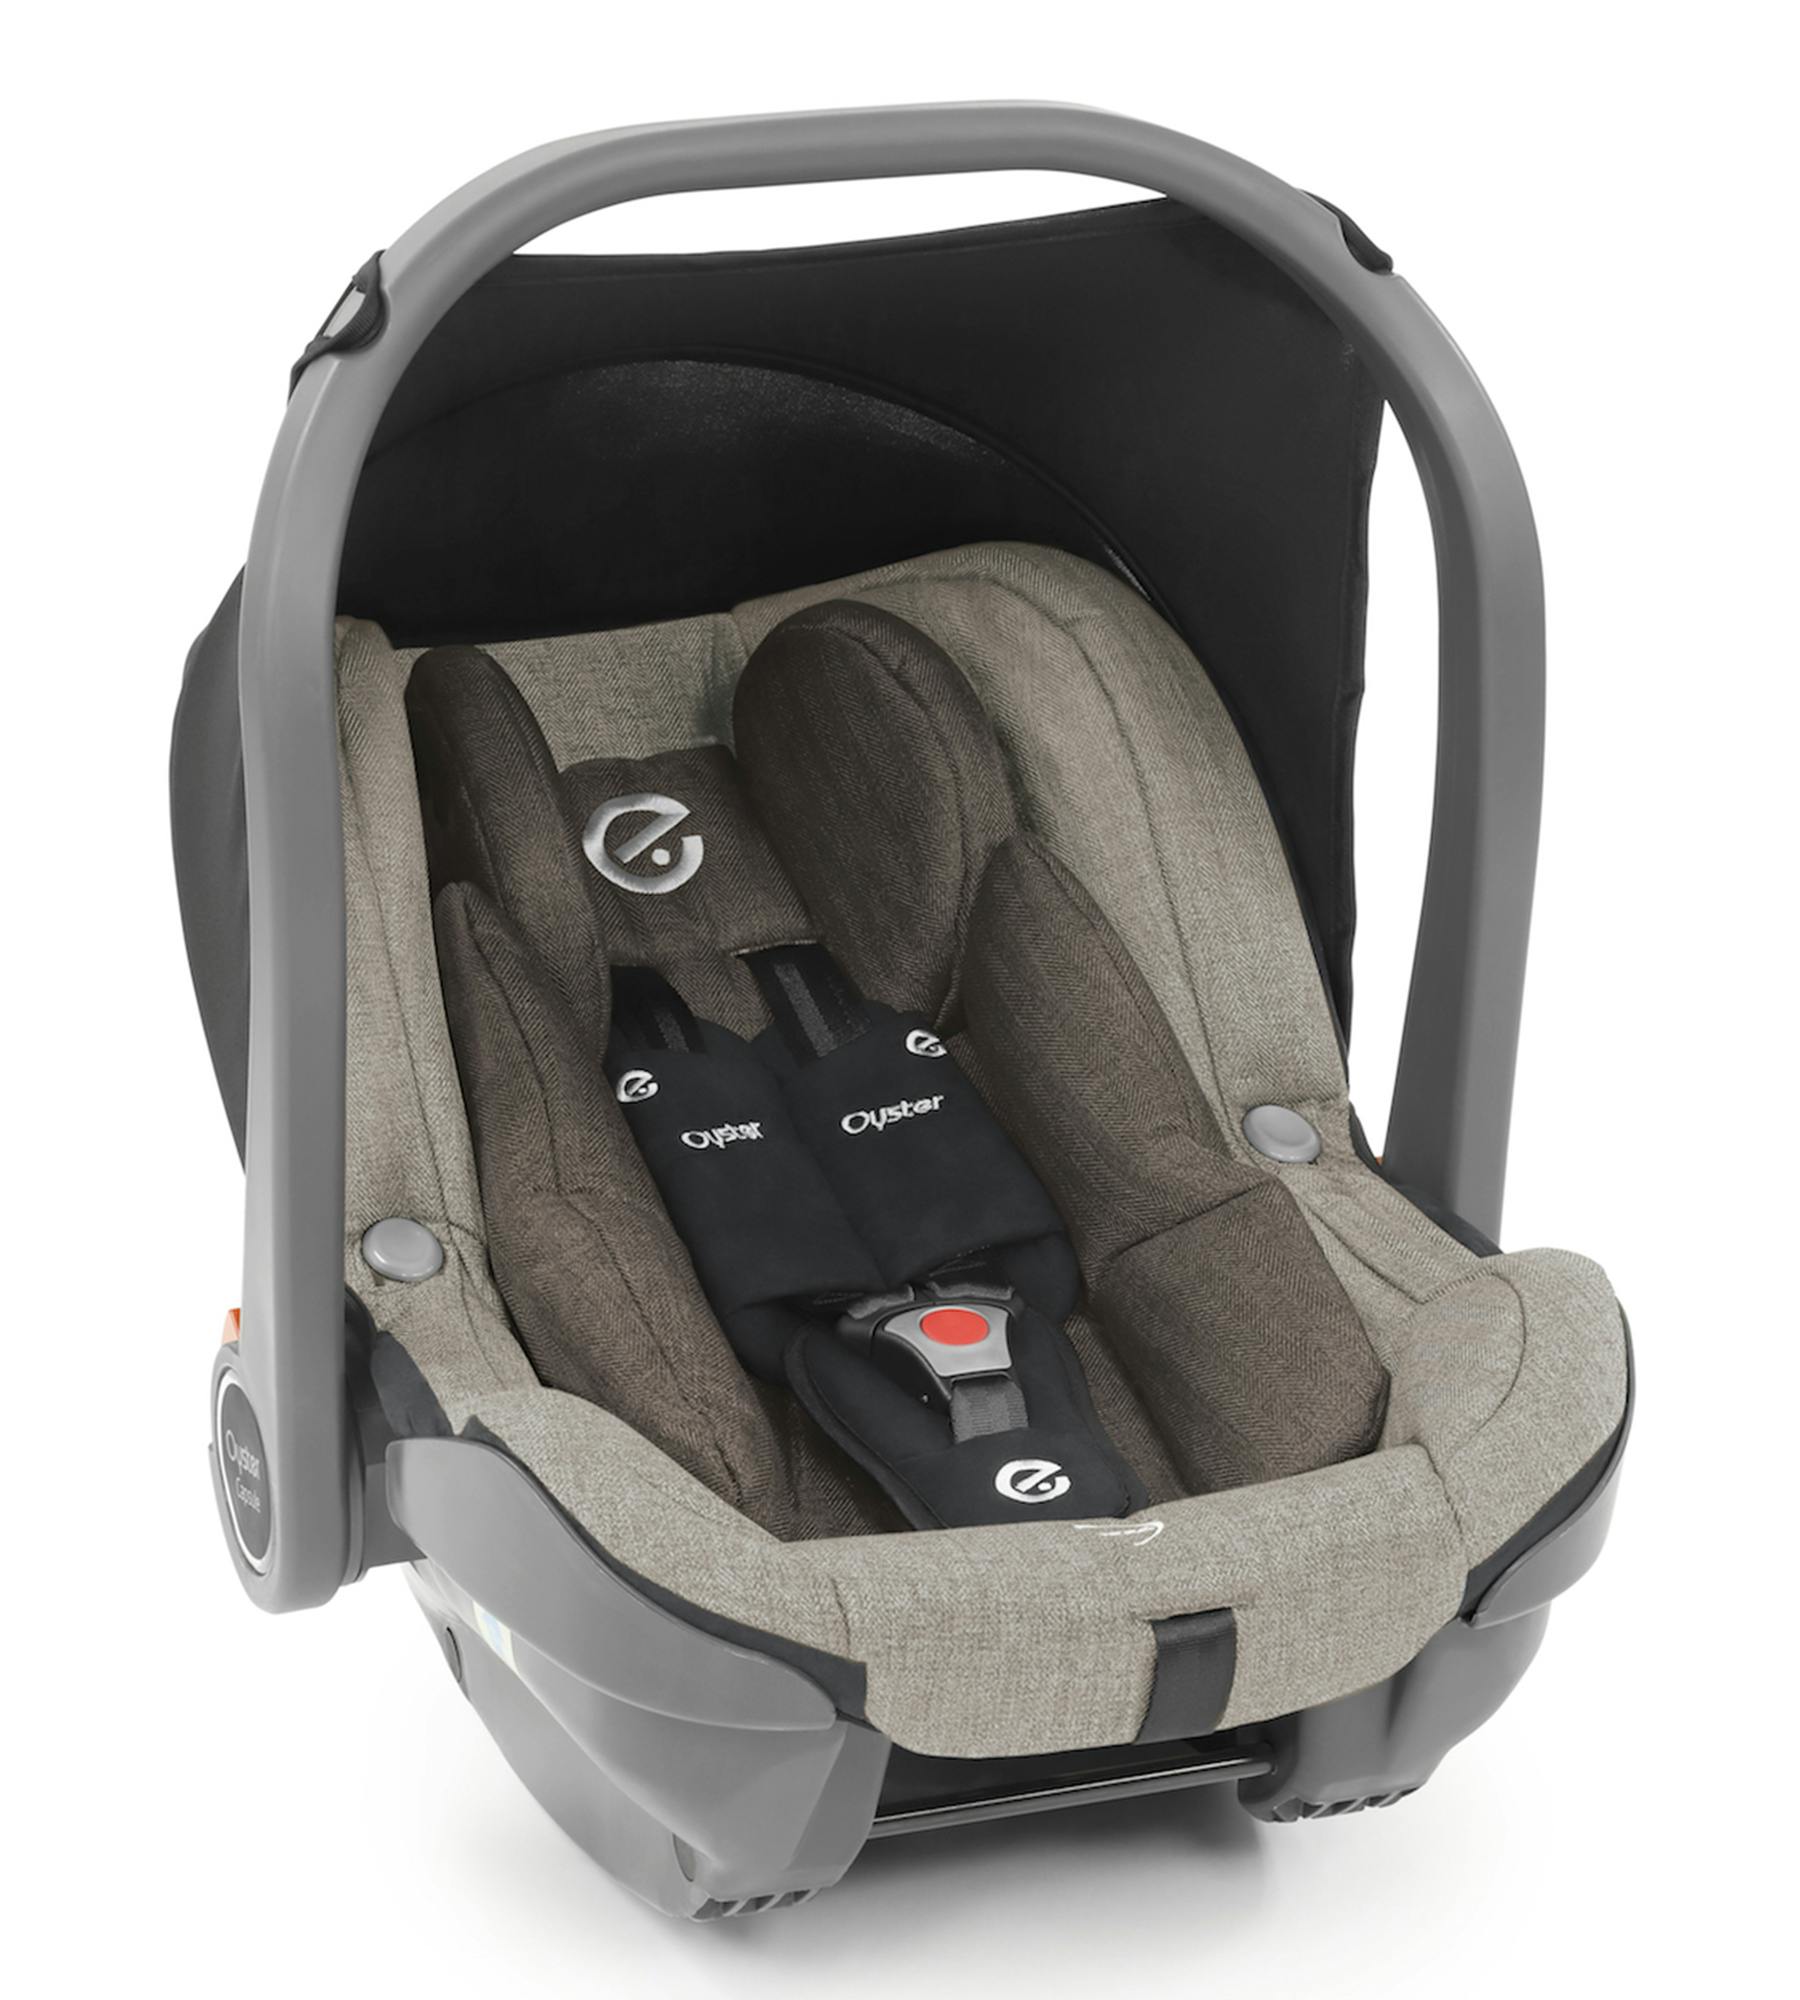 Babystyle Oyster Capsule i-Size Car Seat - Pebble